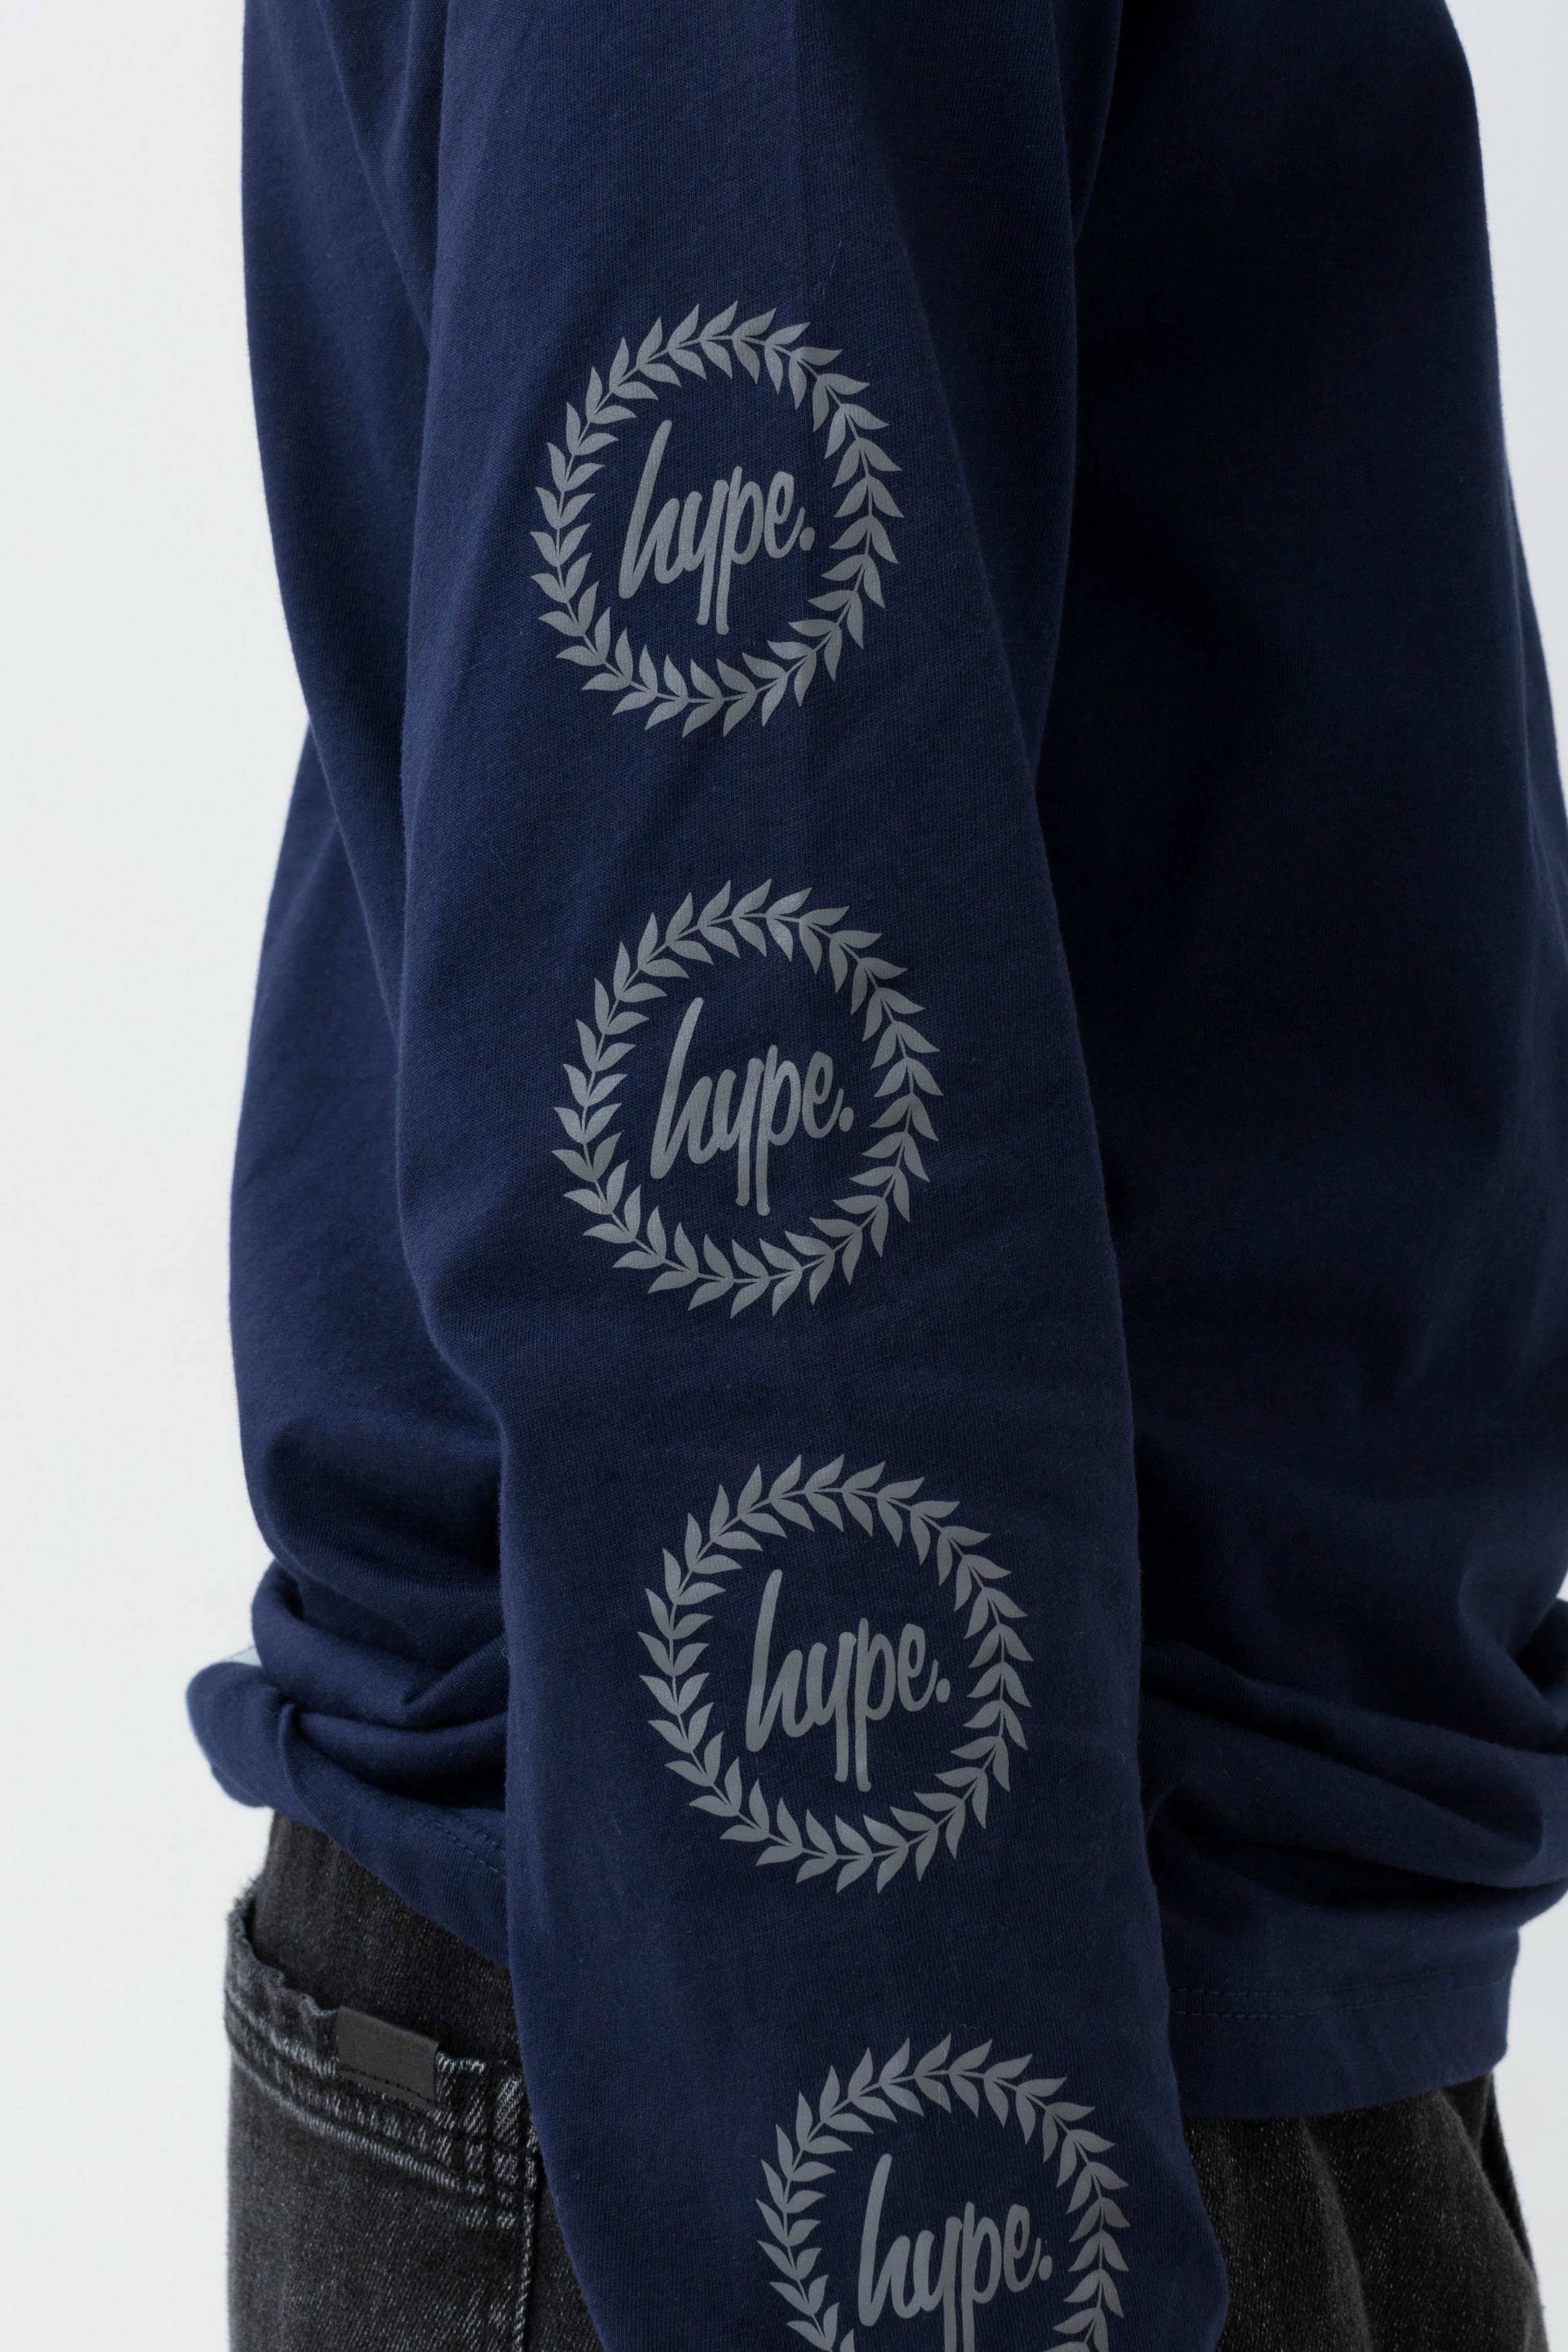 Alternate View 3 of HYPE BOYS NAVY MONUMENT CREST L/S T-SHIRT